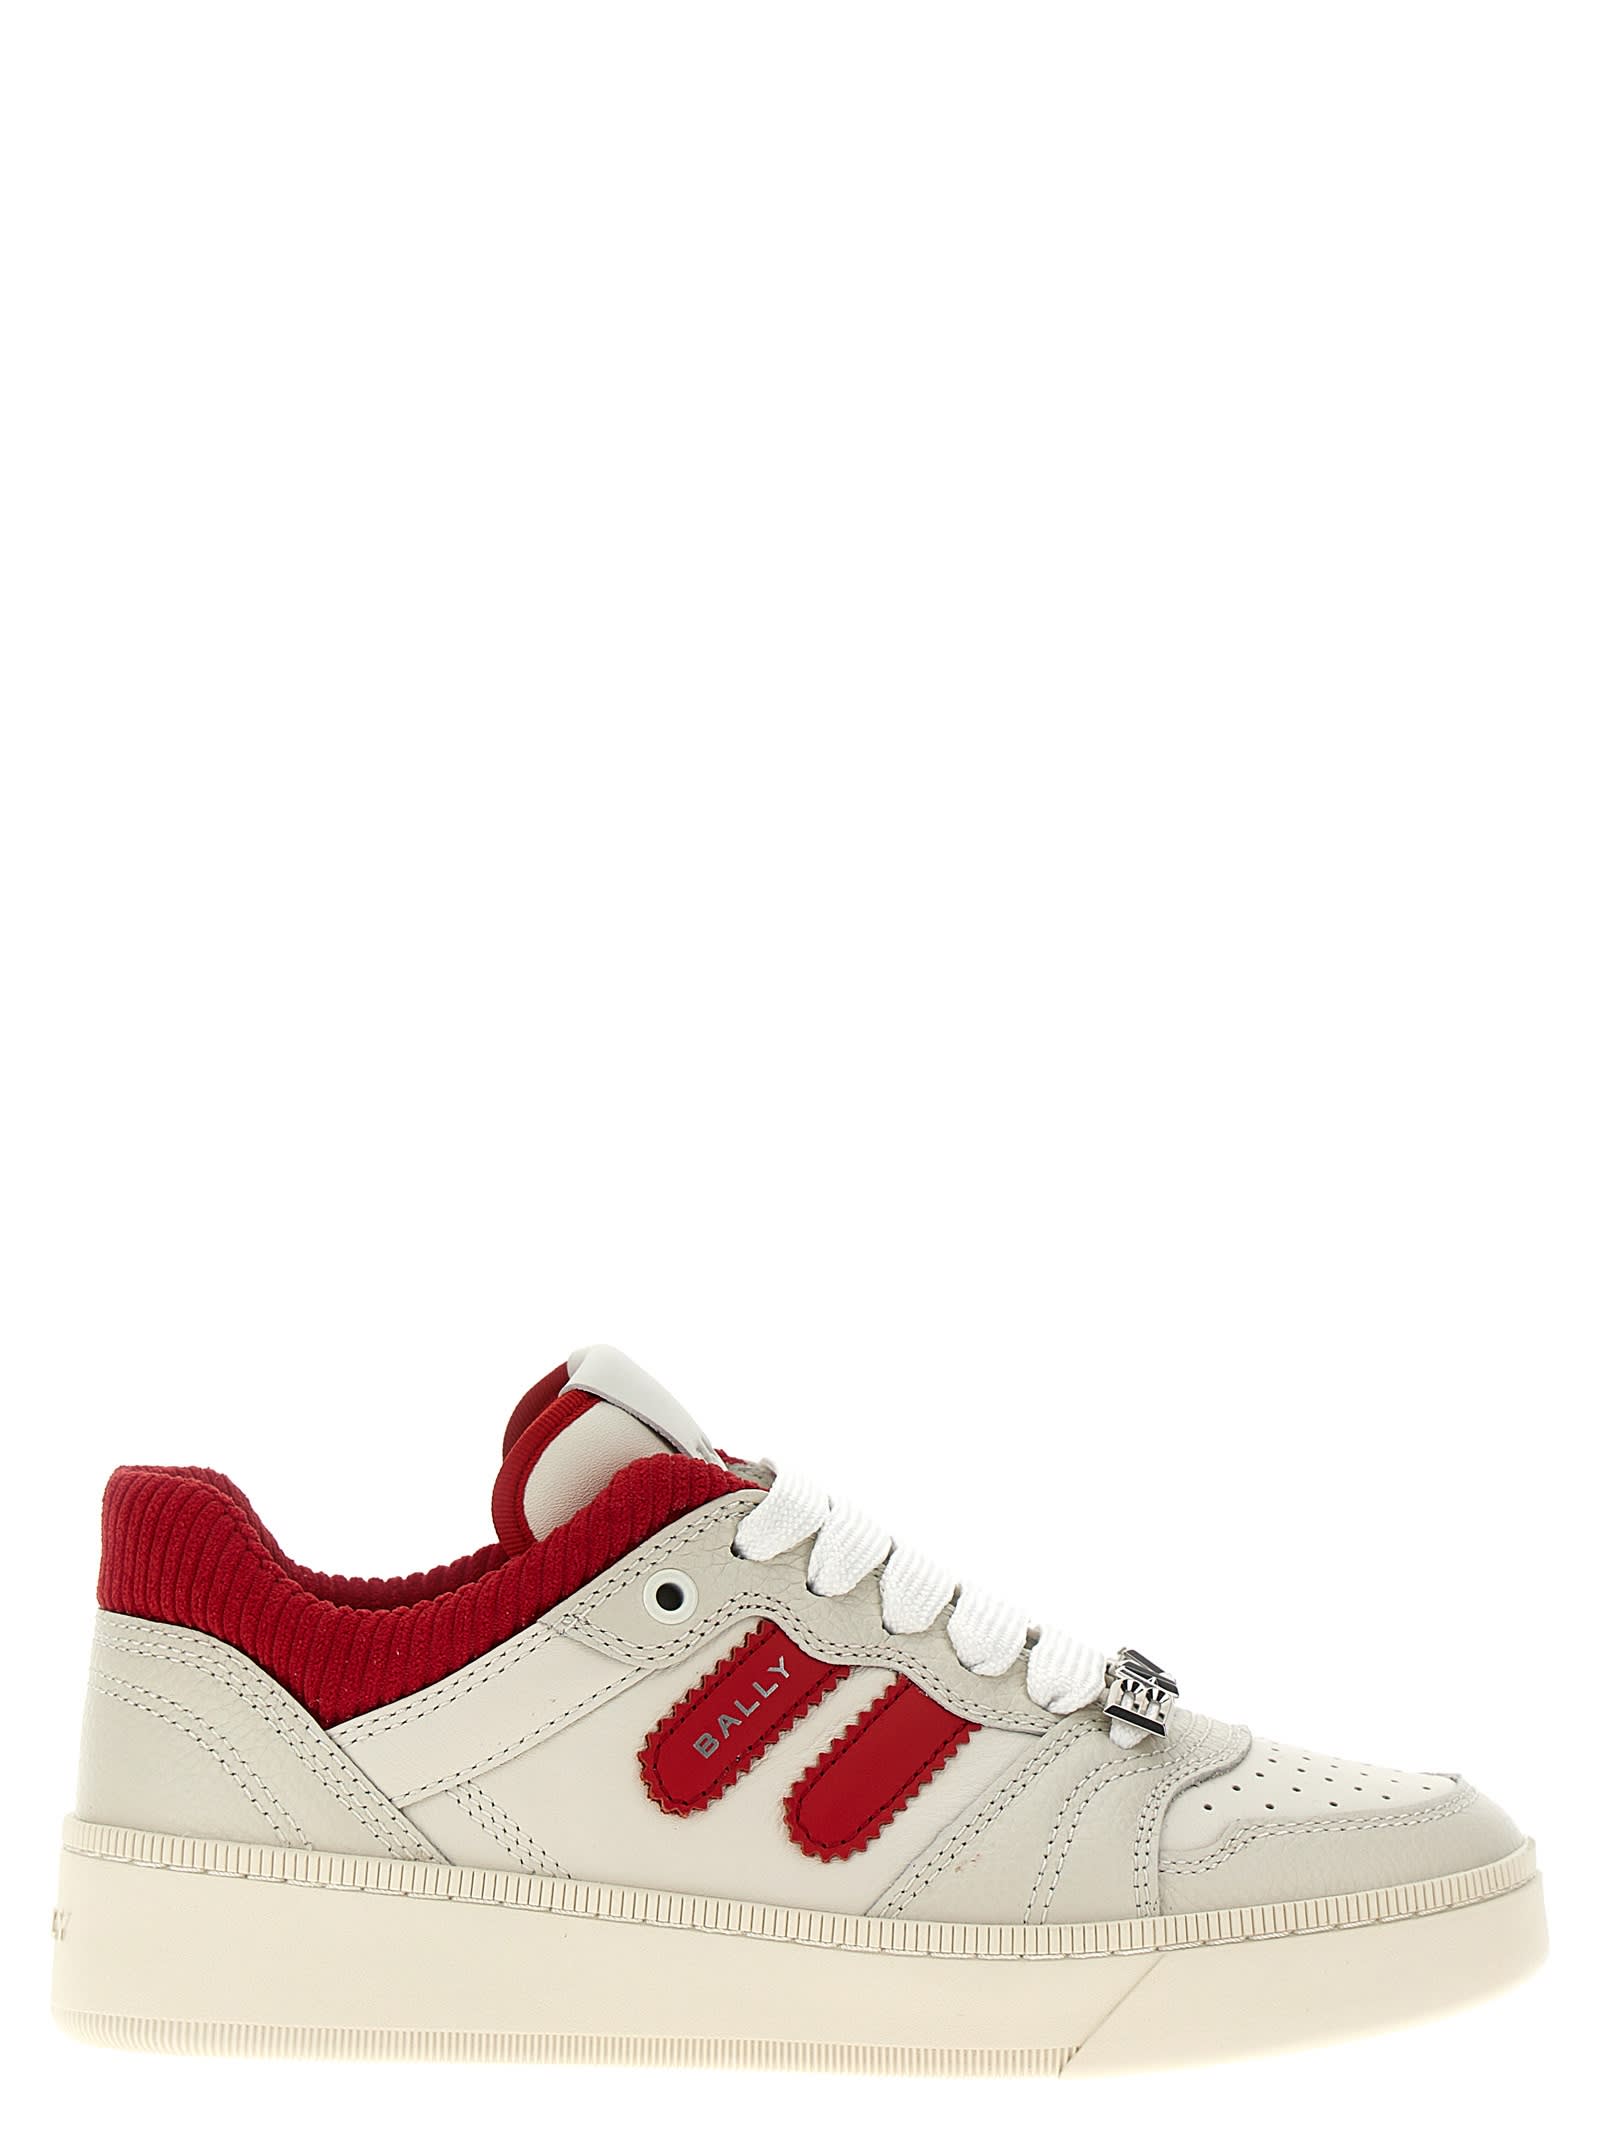 Bally royalty Sneakers